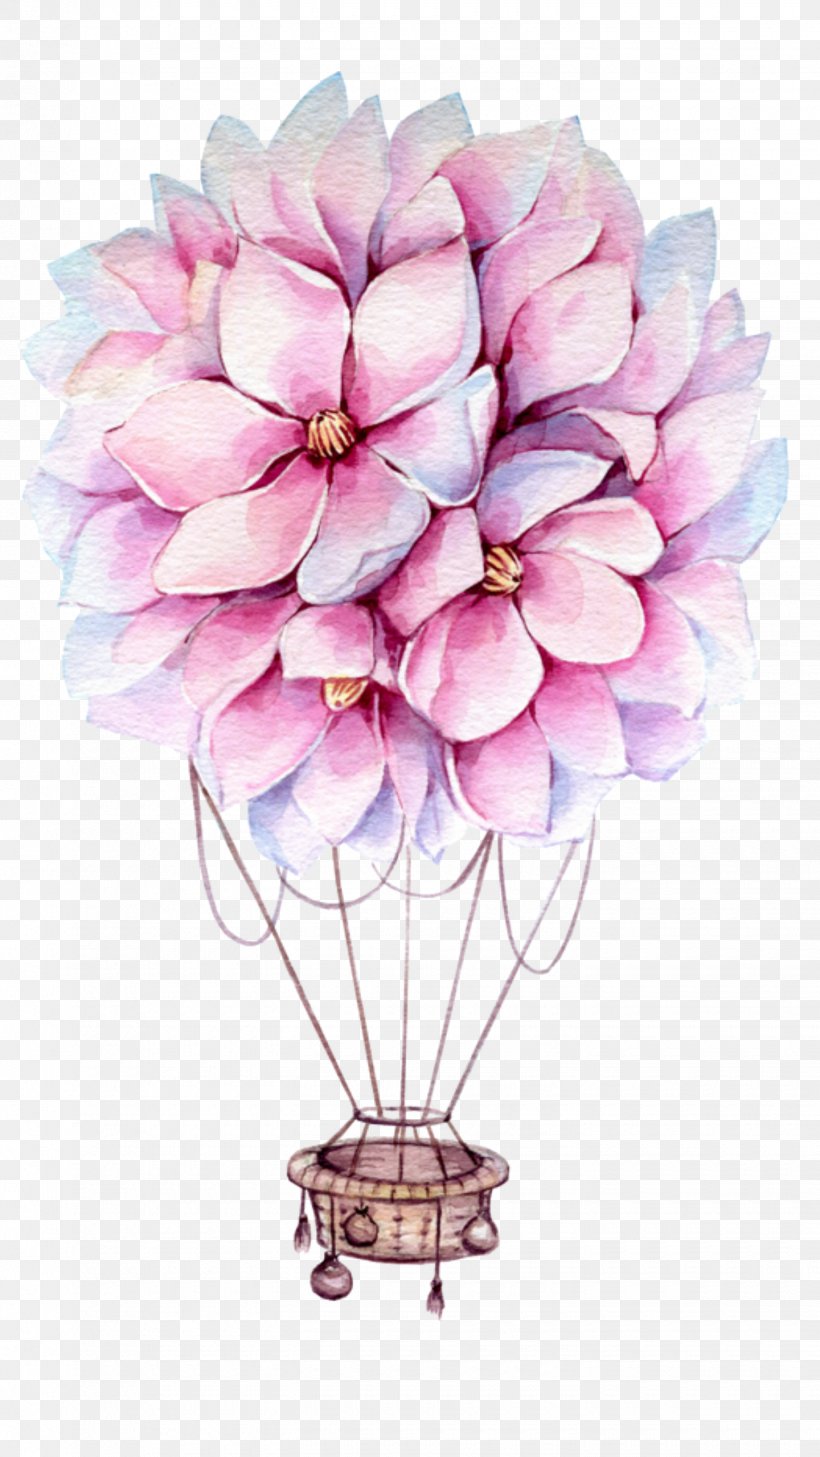 Hot Air Balloon Watercolor Painting Clip Art, PNG, 1440x2560px, Balloon, Art, Balloon Modelling, Birthday, Cut Flowers Download Free